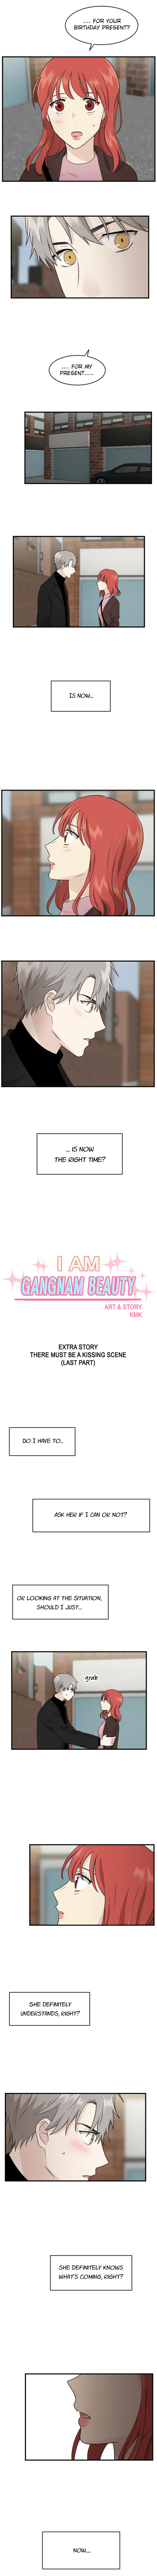 My ID is Gangnam Beauty Ch. 84 Extra 3 There Must Be a Kissing Scene (2nd Part)